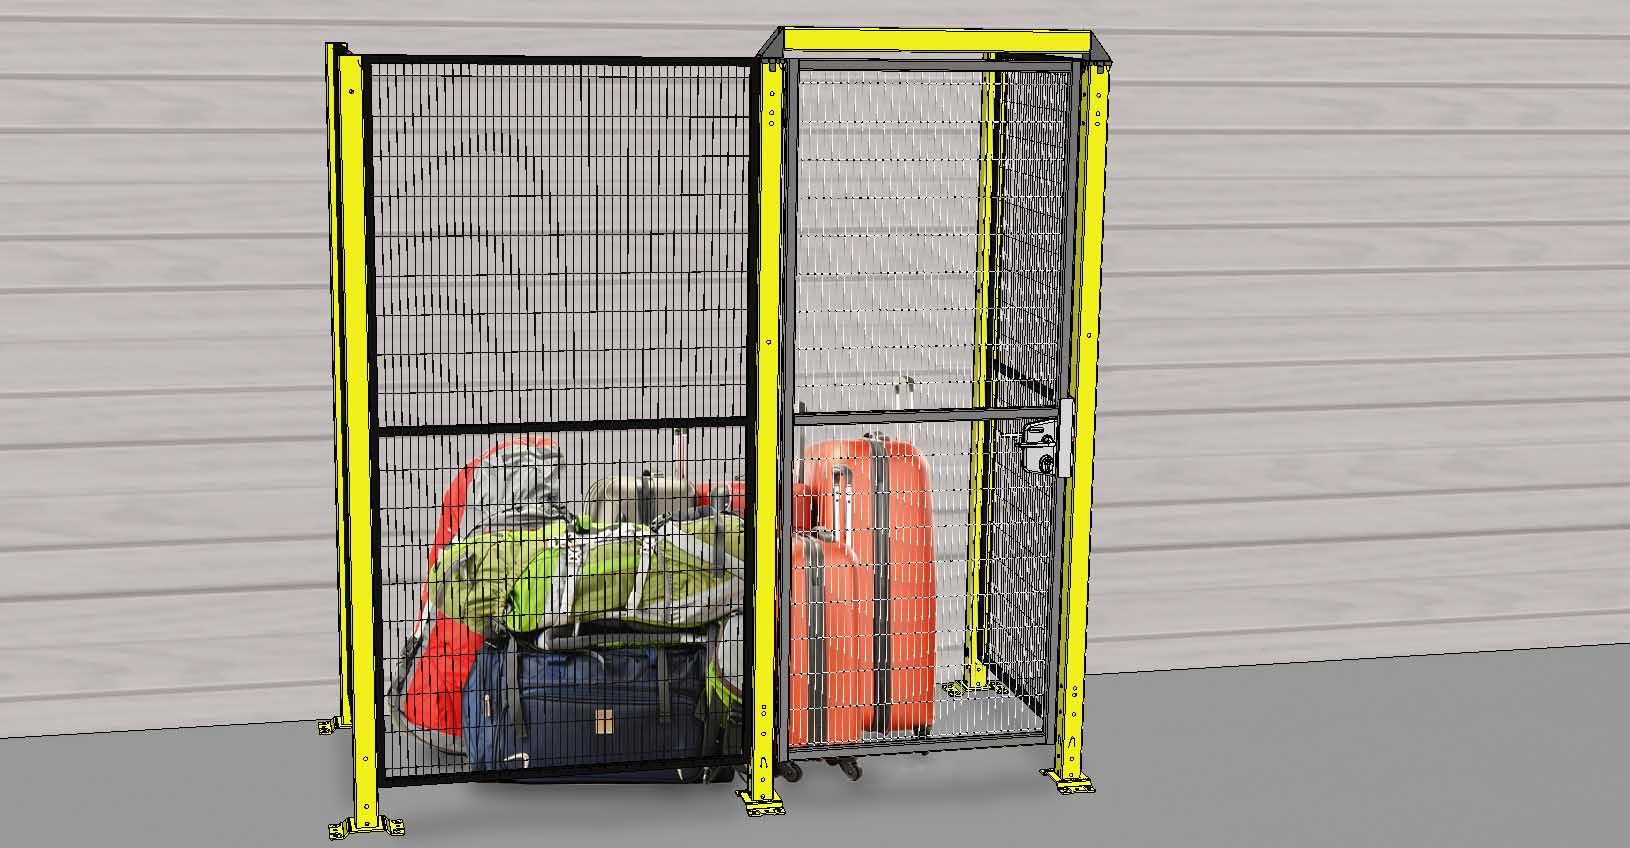 UK Suppliers of Lockable Storage Cages